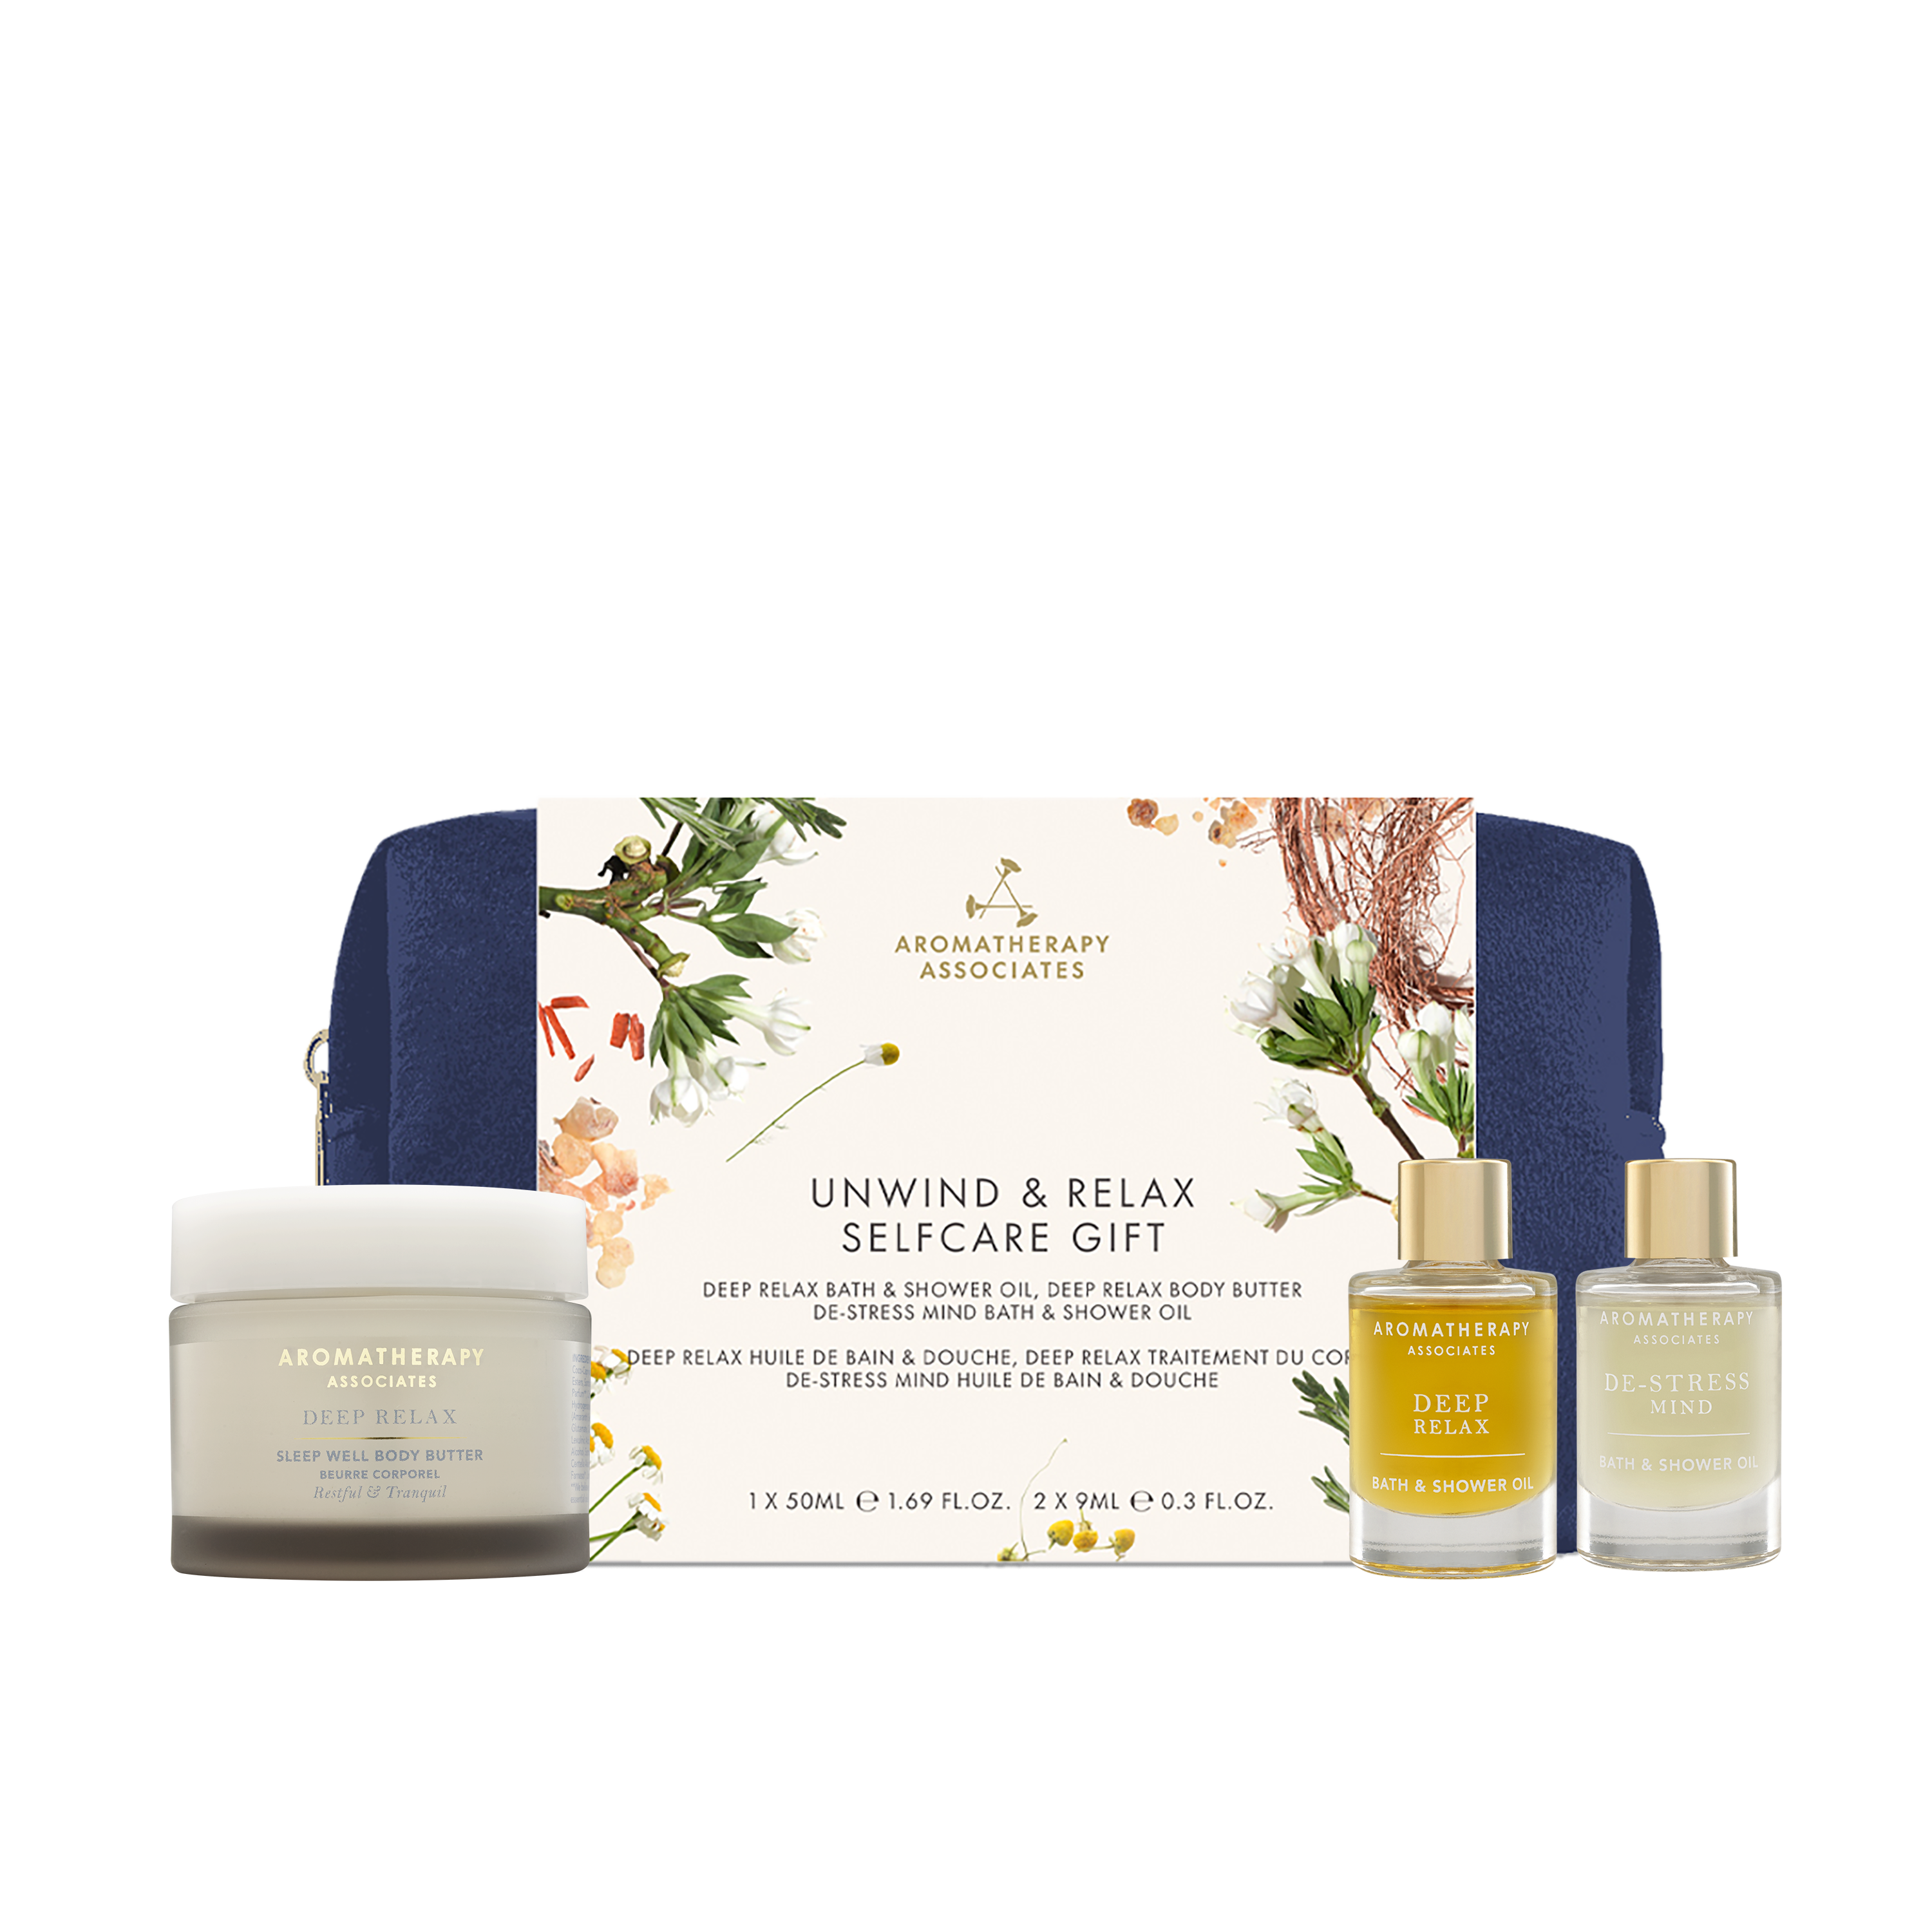 Unwind & Relax Selfcare Gift